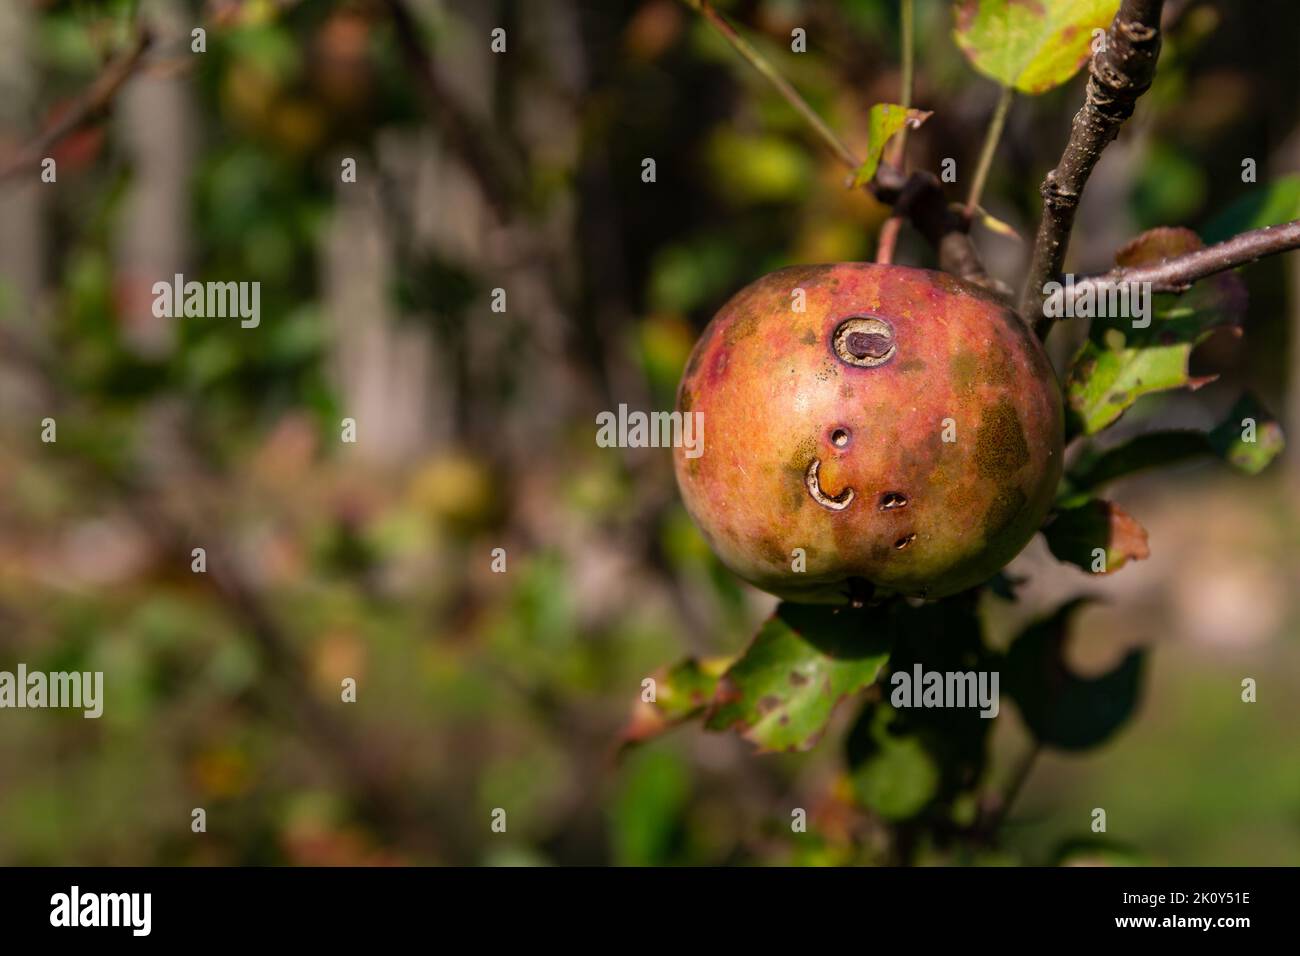 Close view of a garden apple with disease fungus and insect damage in the summertime. Stock Photo